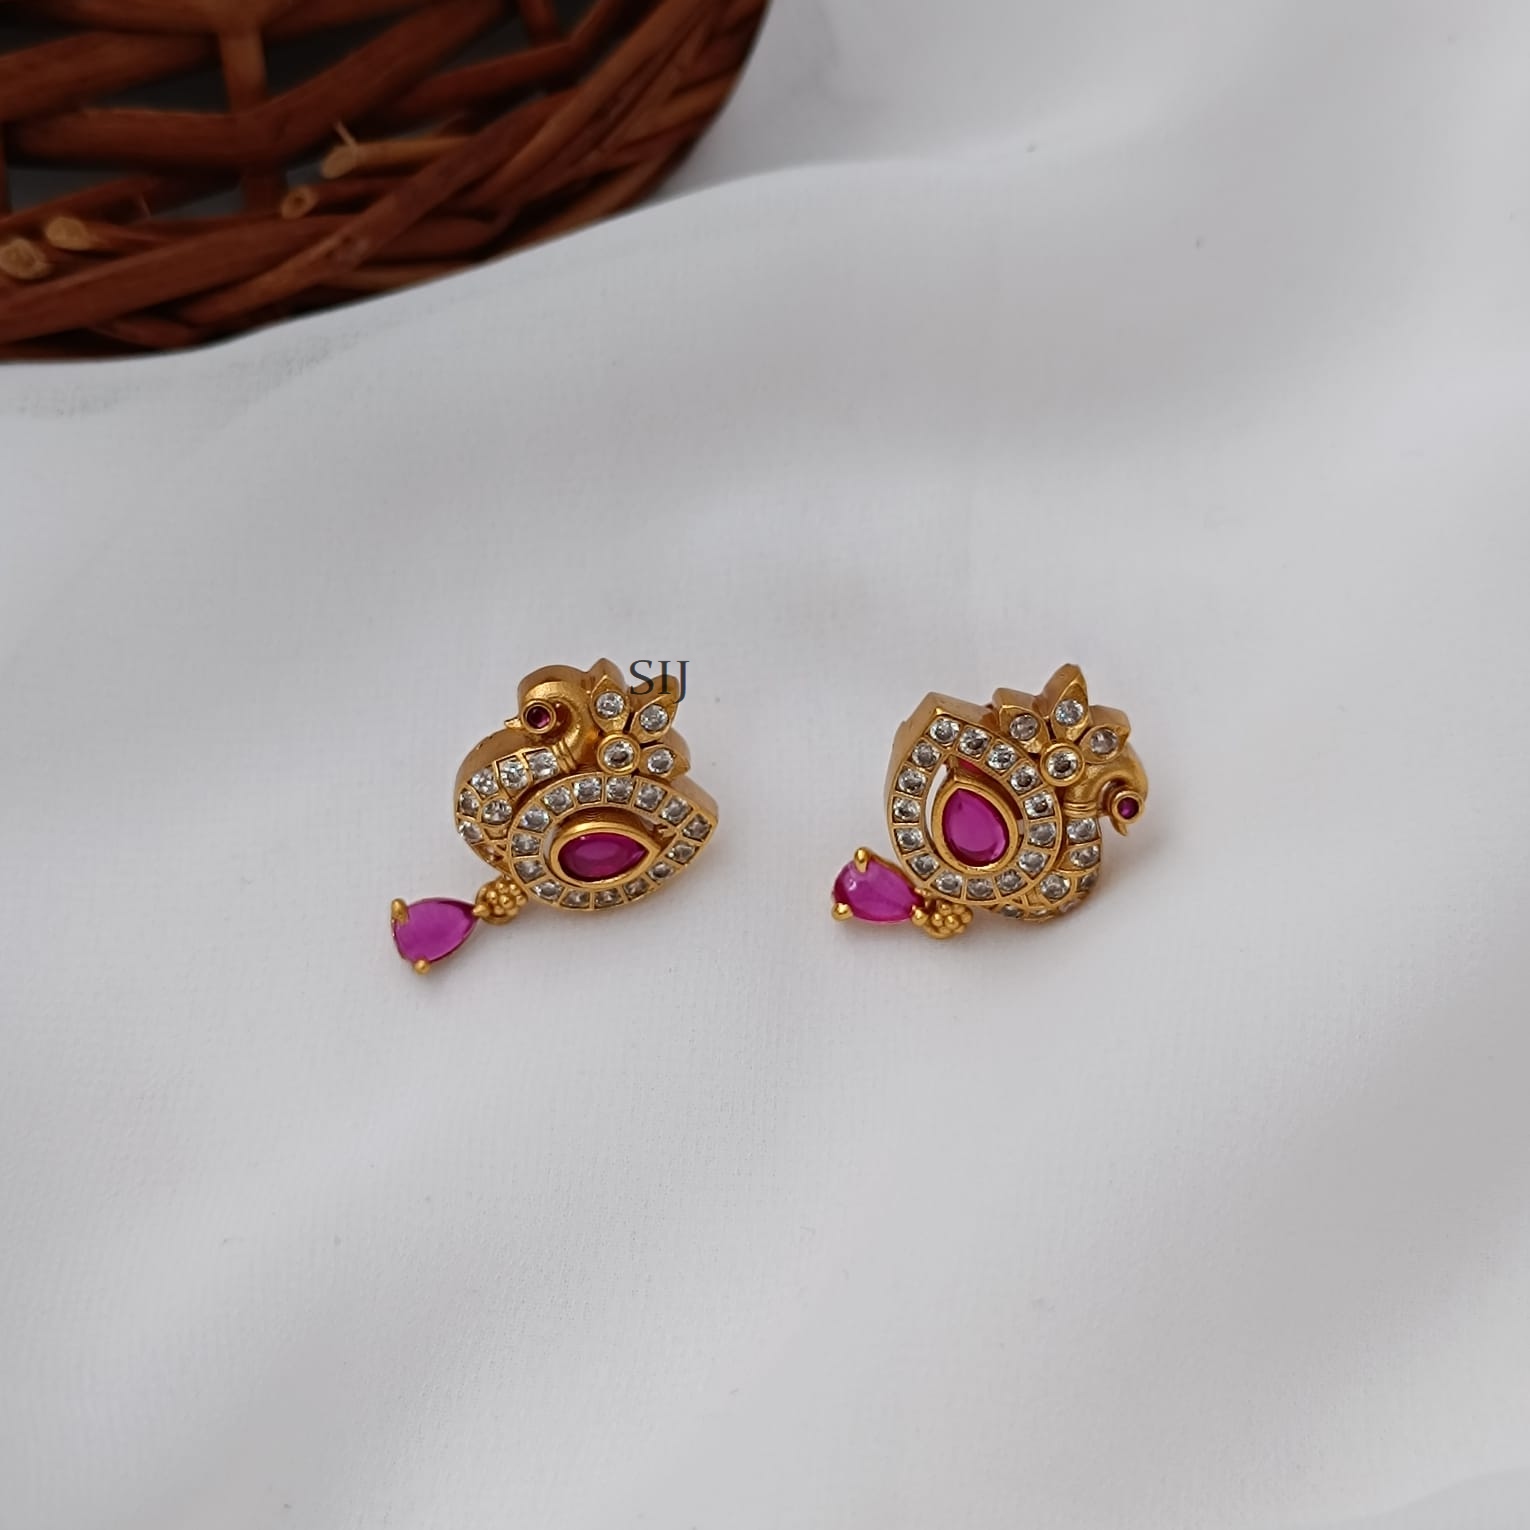 Marvelous Ruby and White Stones Peacock Earrings